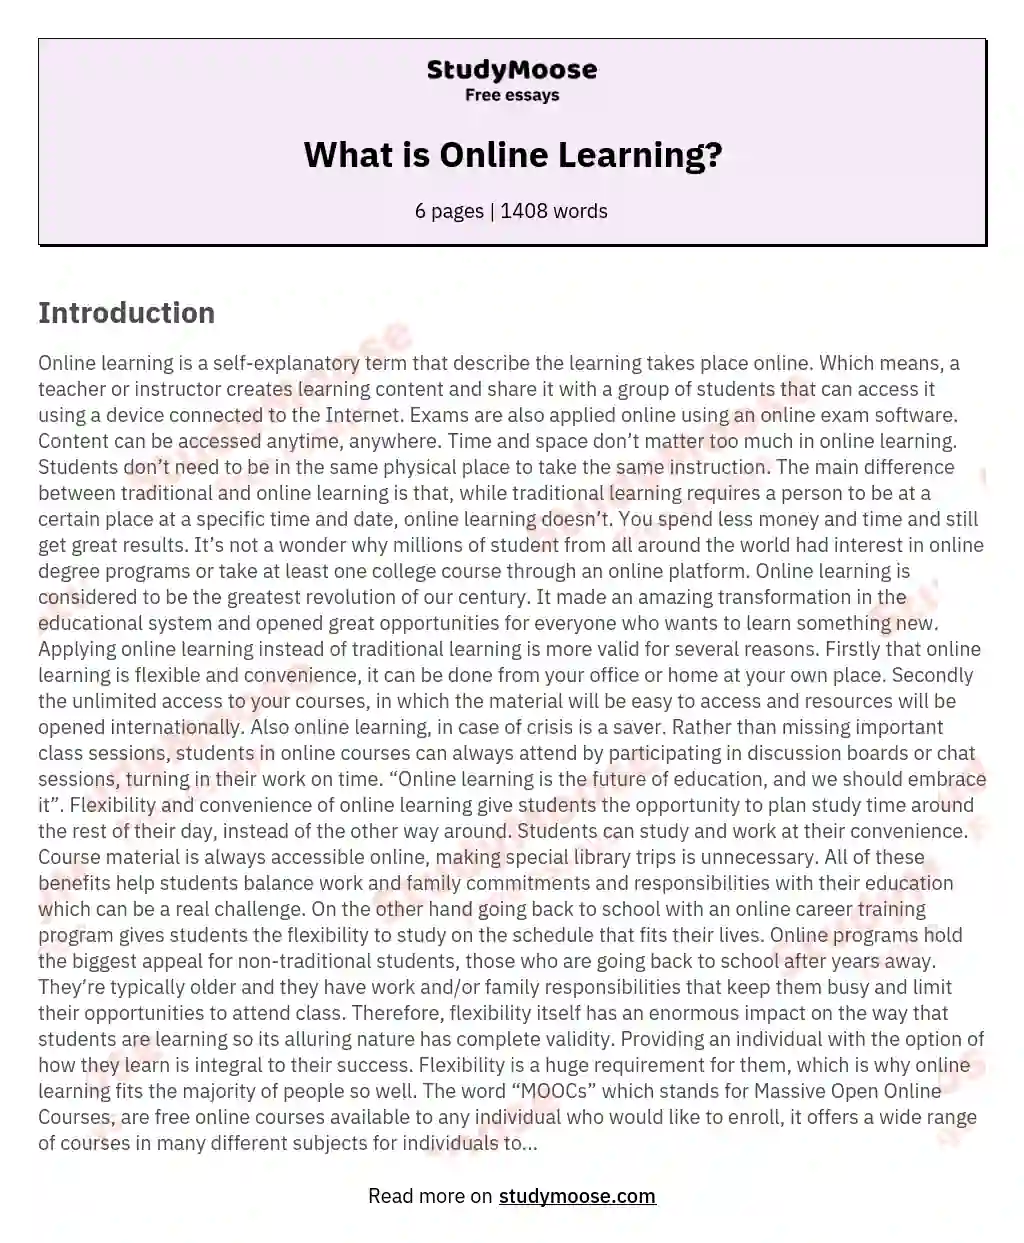 What is Online Learning?